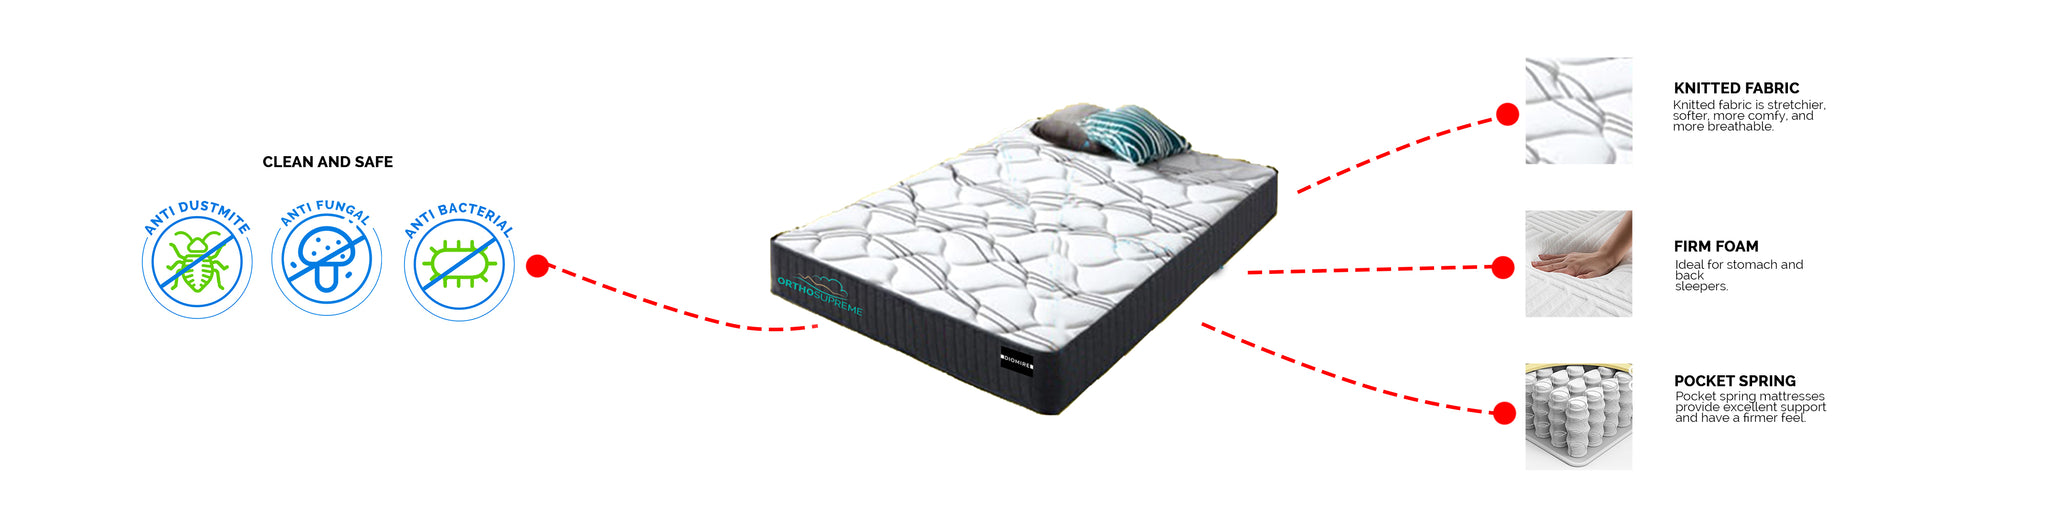 Diomire Ortho Supreme Pocket Spring Mattress - 10" Mattress In Single, Super Single, Queen and King Size